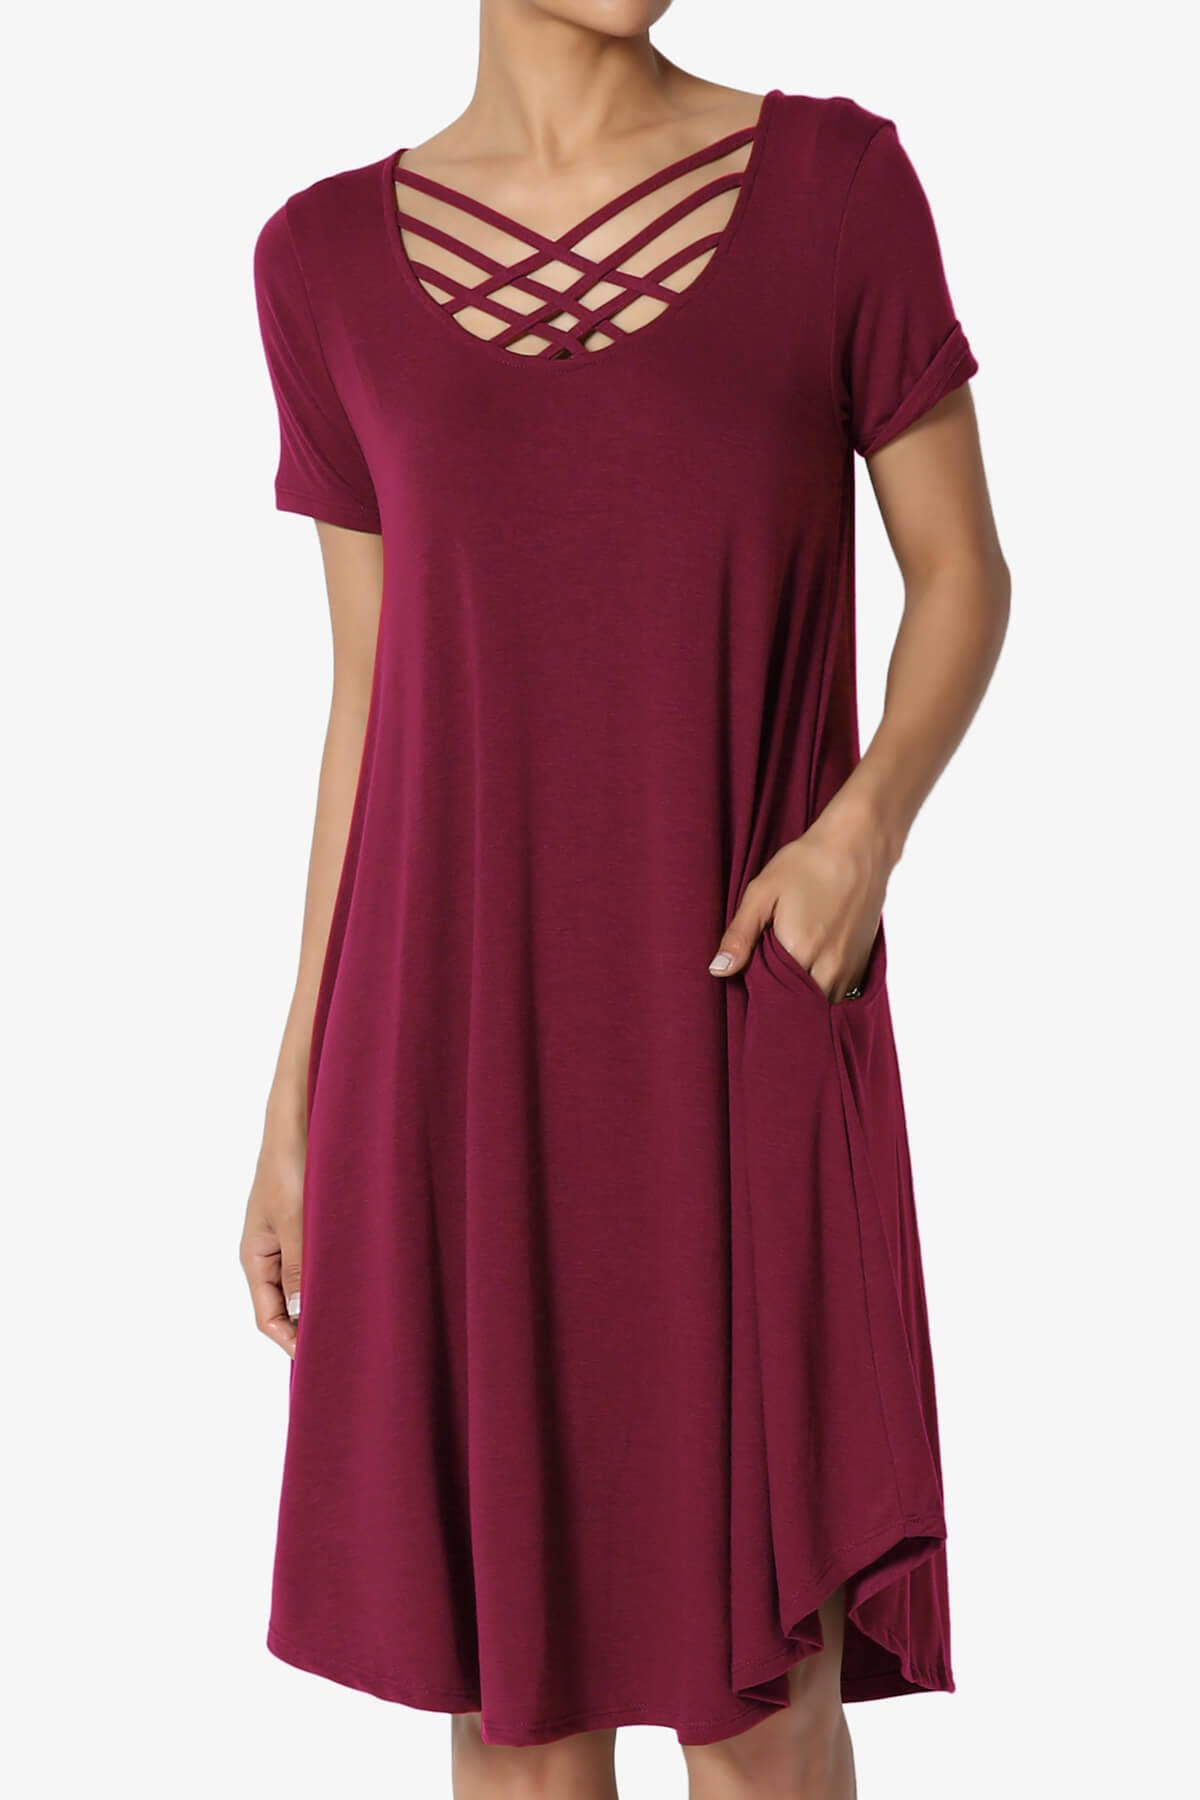 Comfortable Flowy Red T Shirt Dress | Image